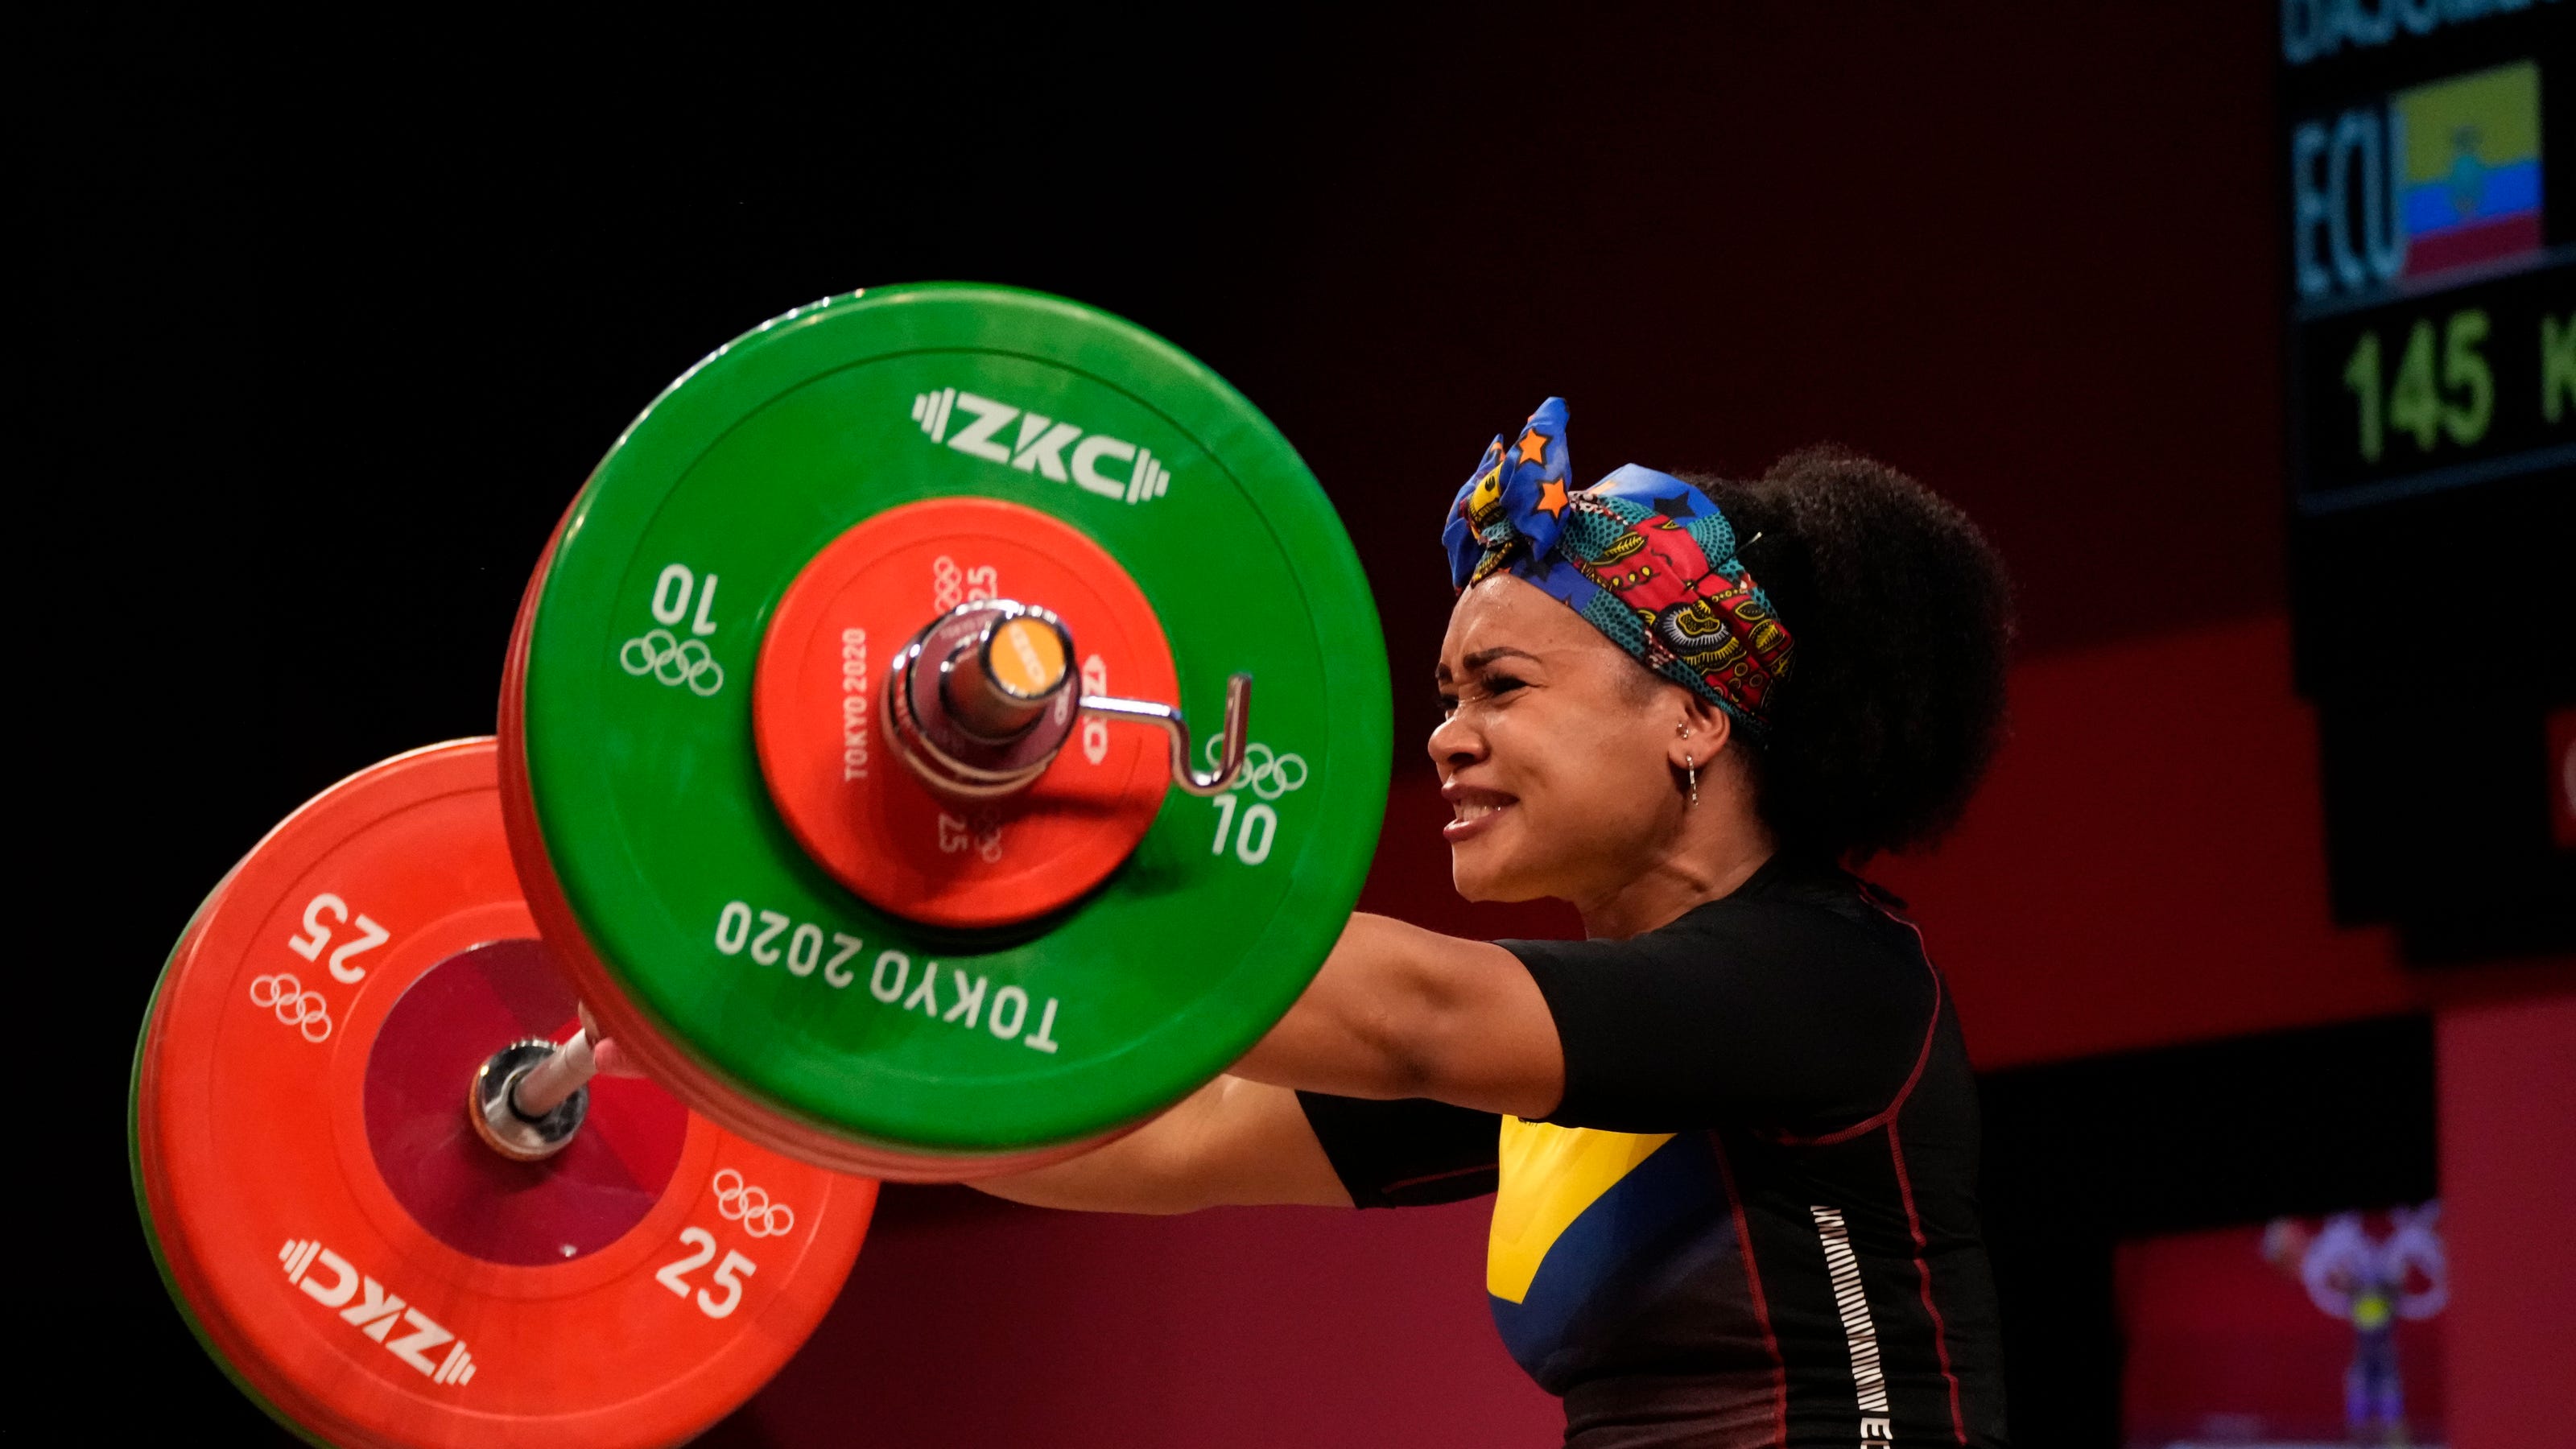 Kate Nye wins rare silver medal for US in weightlifting